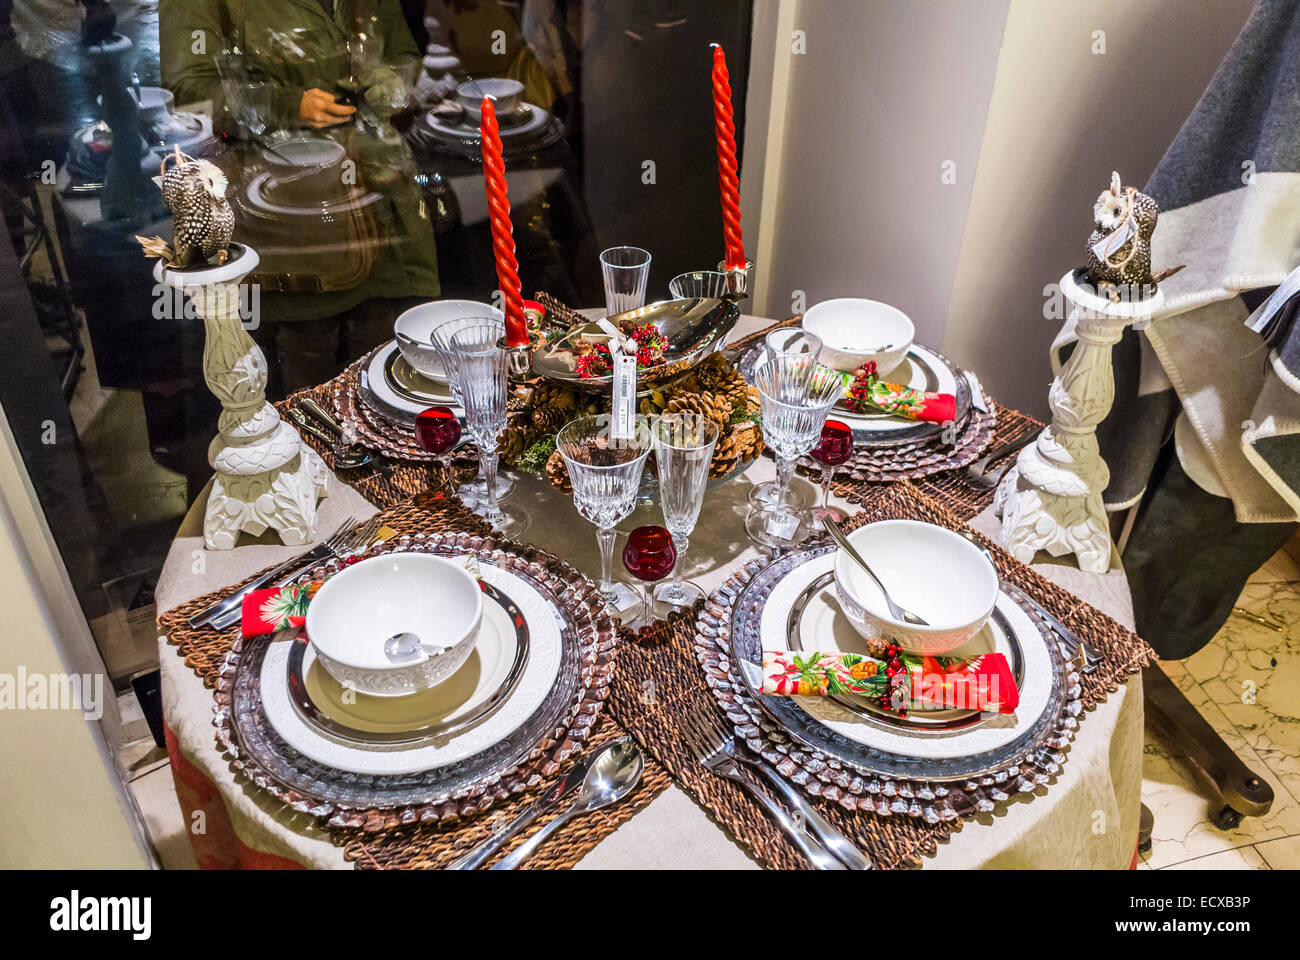 Paris, France, inside Holiday Display, Christmas Table, Decorations, Zara  Home Shop Front Window Stock Photo - Alamy